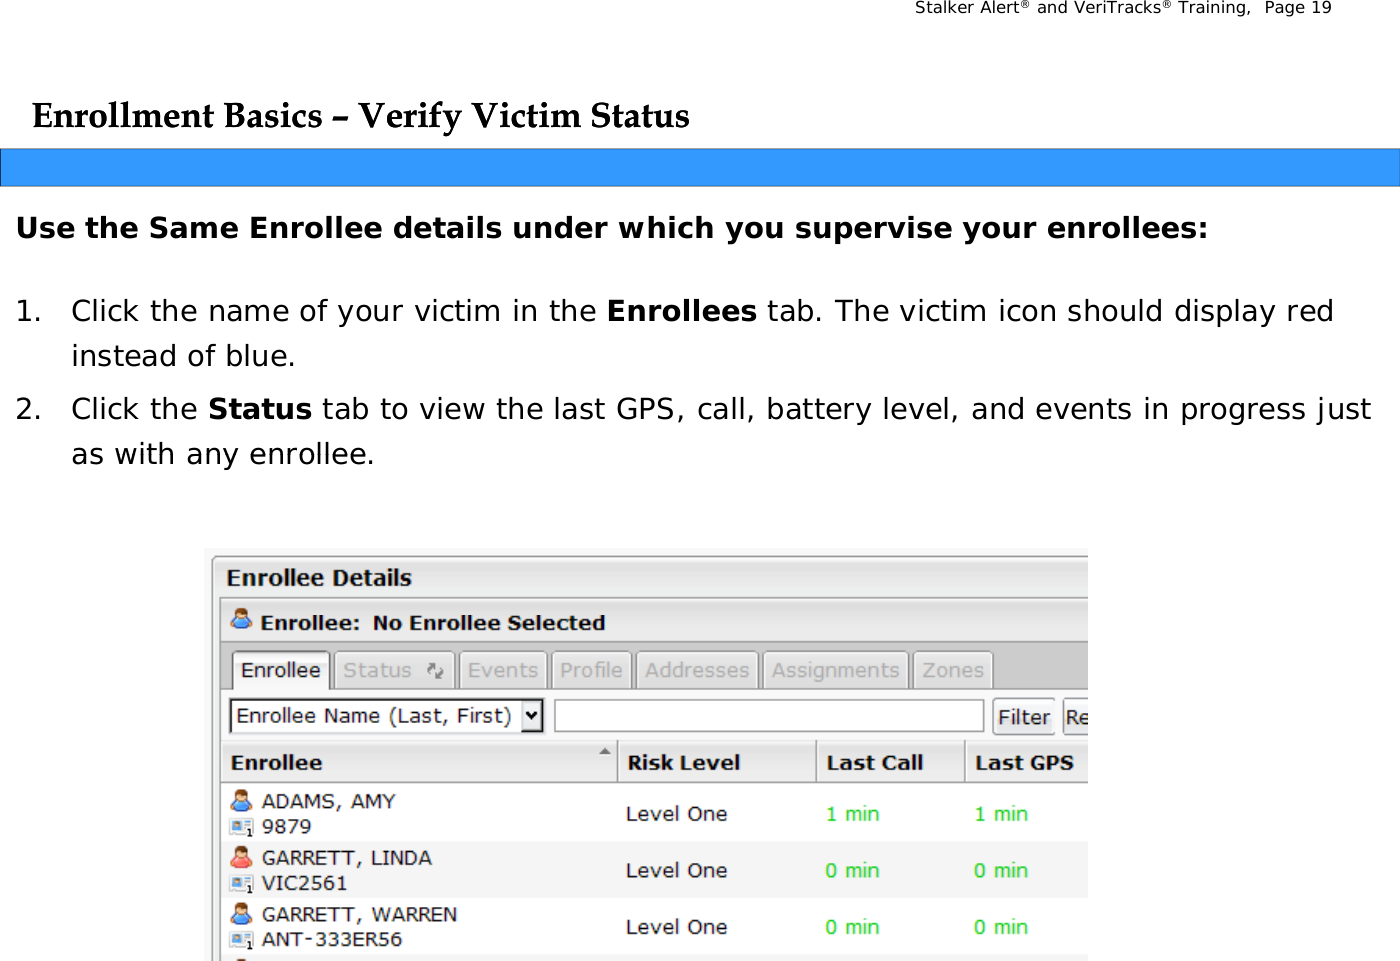 Stalker Alert®and VeriTracks®Training,  Page 19Enrollment Basics Enrollment Basics ––Verify Victim StatusVerify Victim StatusyyUse the Same Enrollee details under which you supervise your enrollees:1. Click the name of your victim in the Enrollees tab. The victim icon should display red instead of blue. 2. Click the Status tab to view the last GPS, call, battery level, and events in progress just as with any enrolleeas with any enrollee.